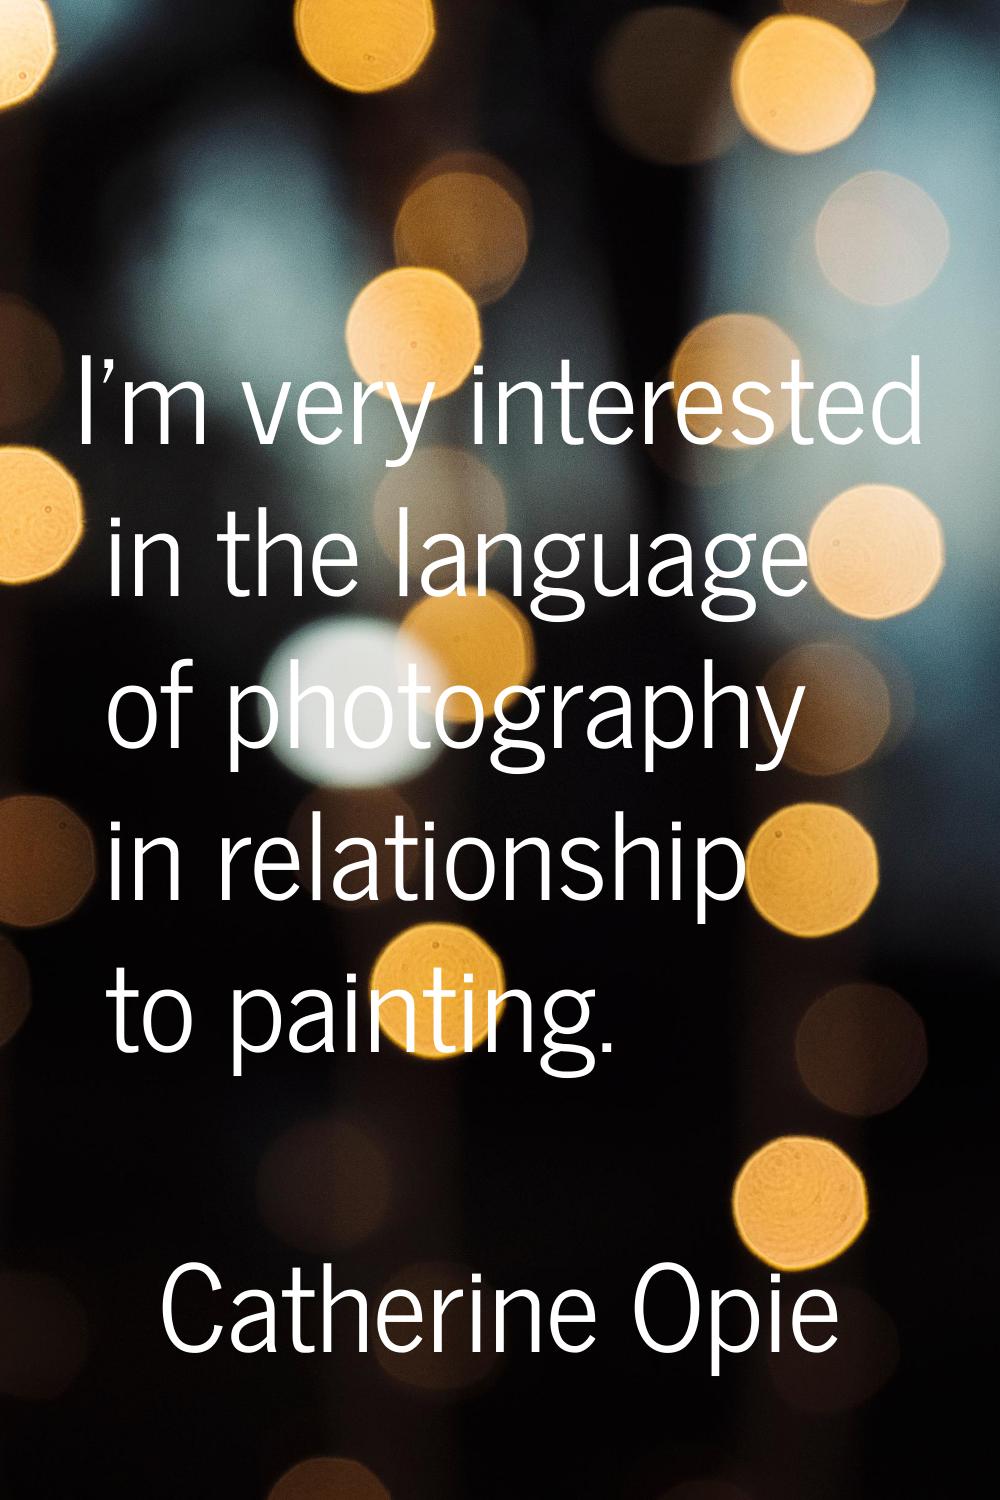 I'm very interested in the language of photography in relationship to painting.